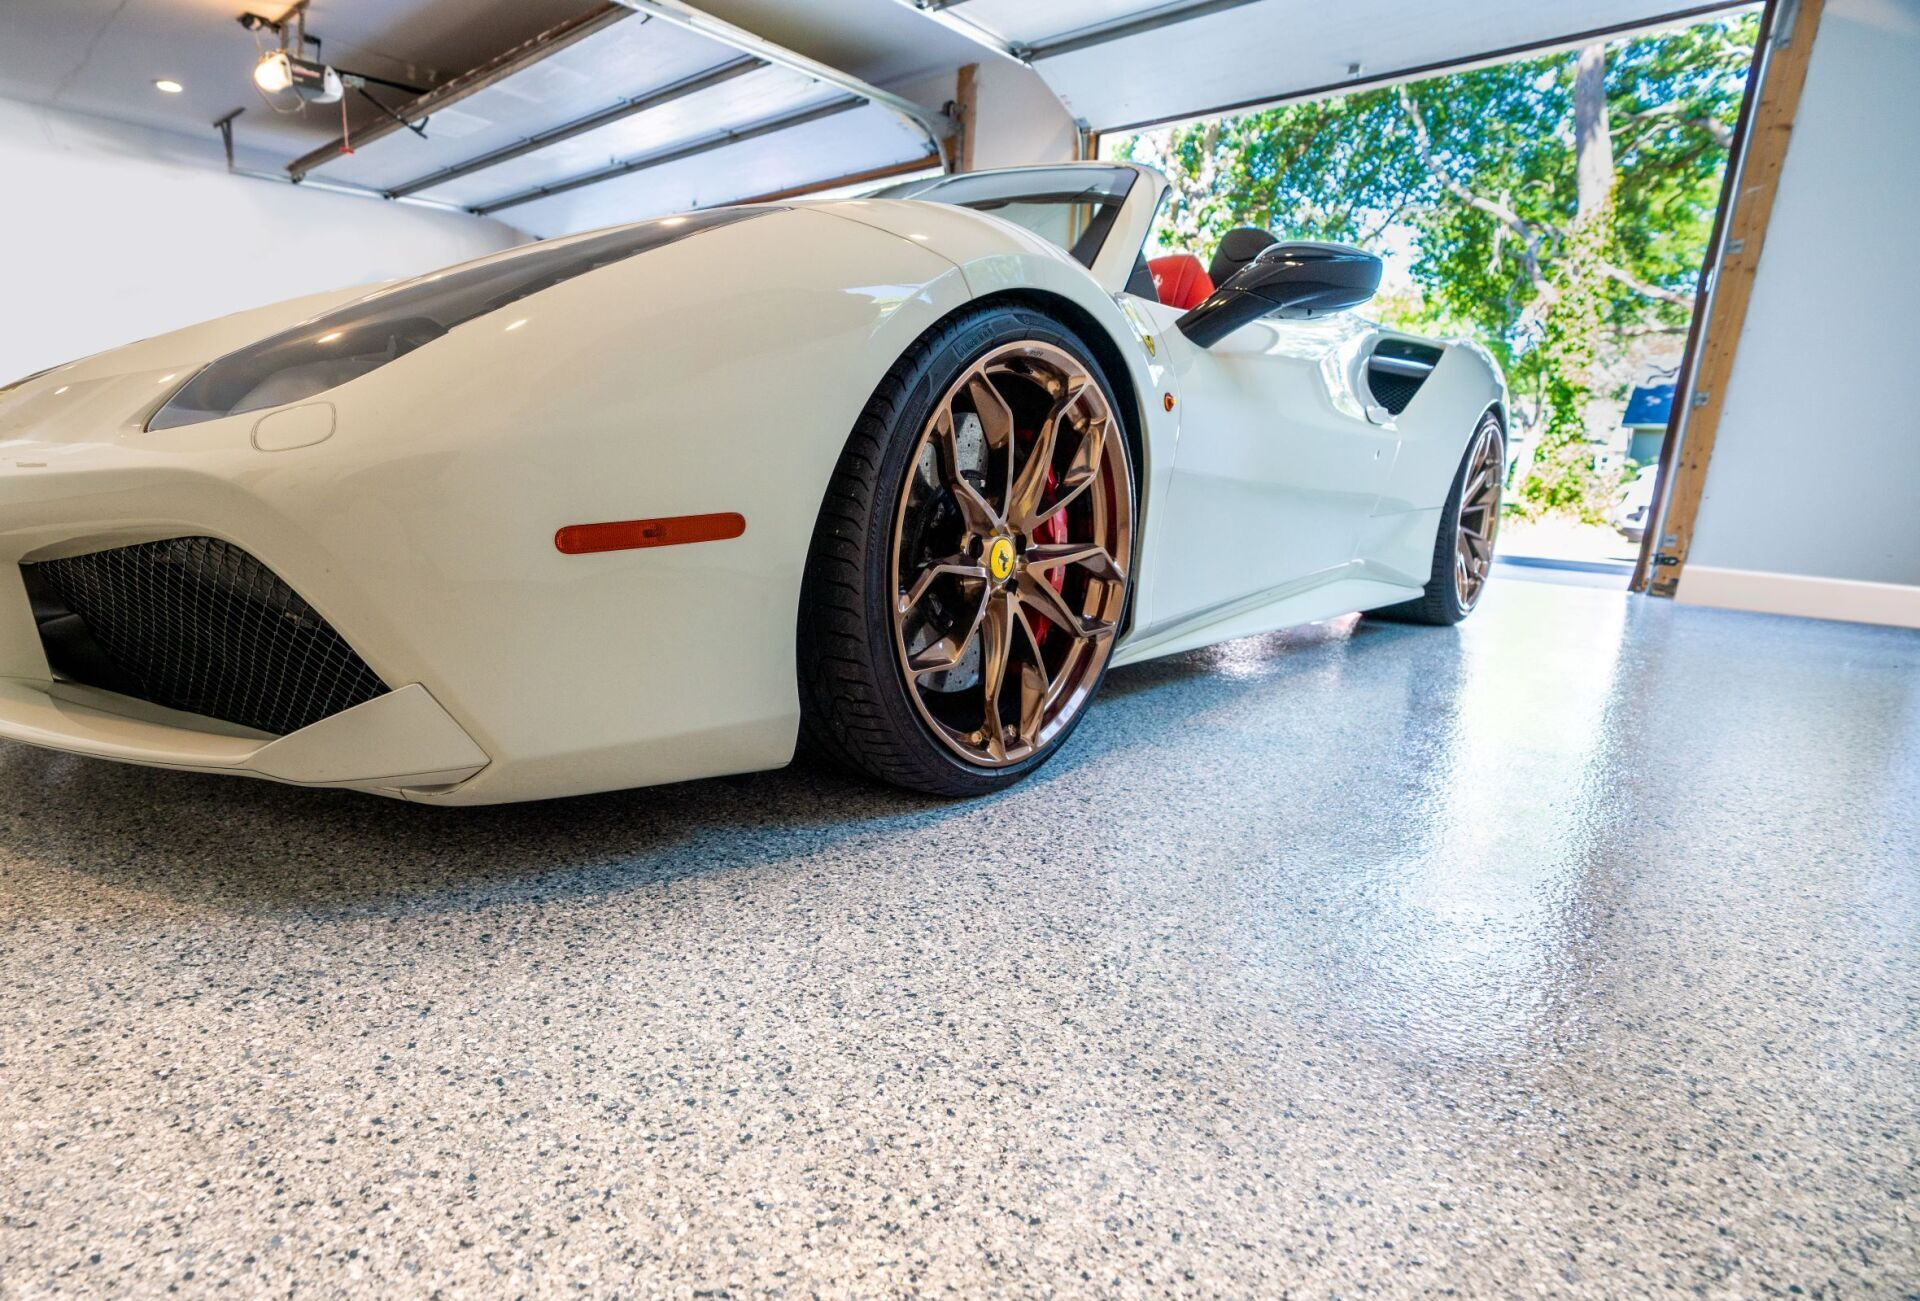 A white sports car is parked in a garage.